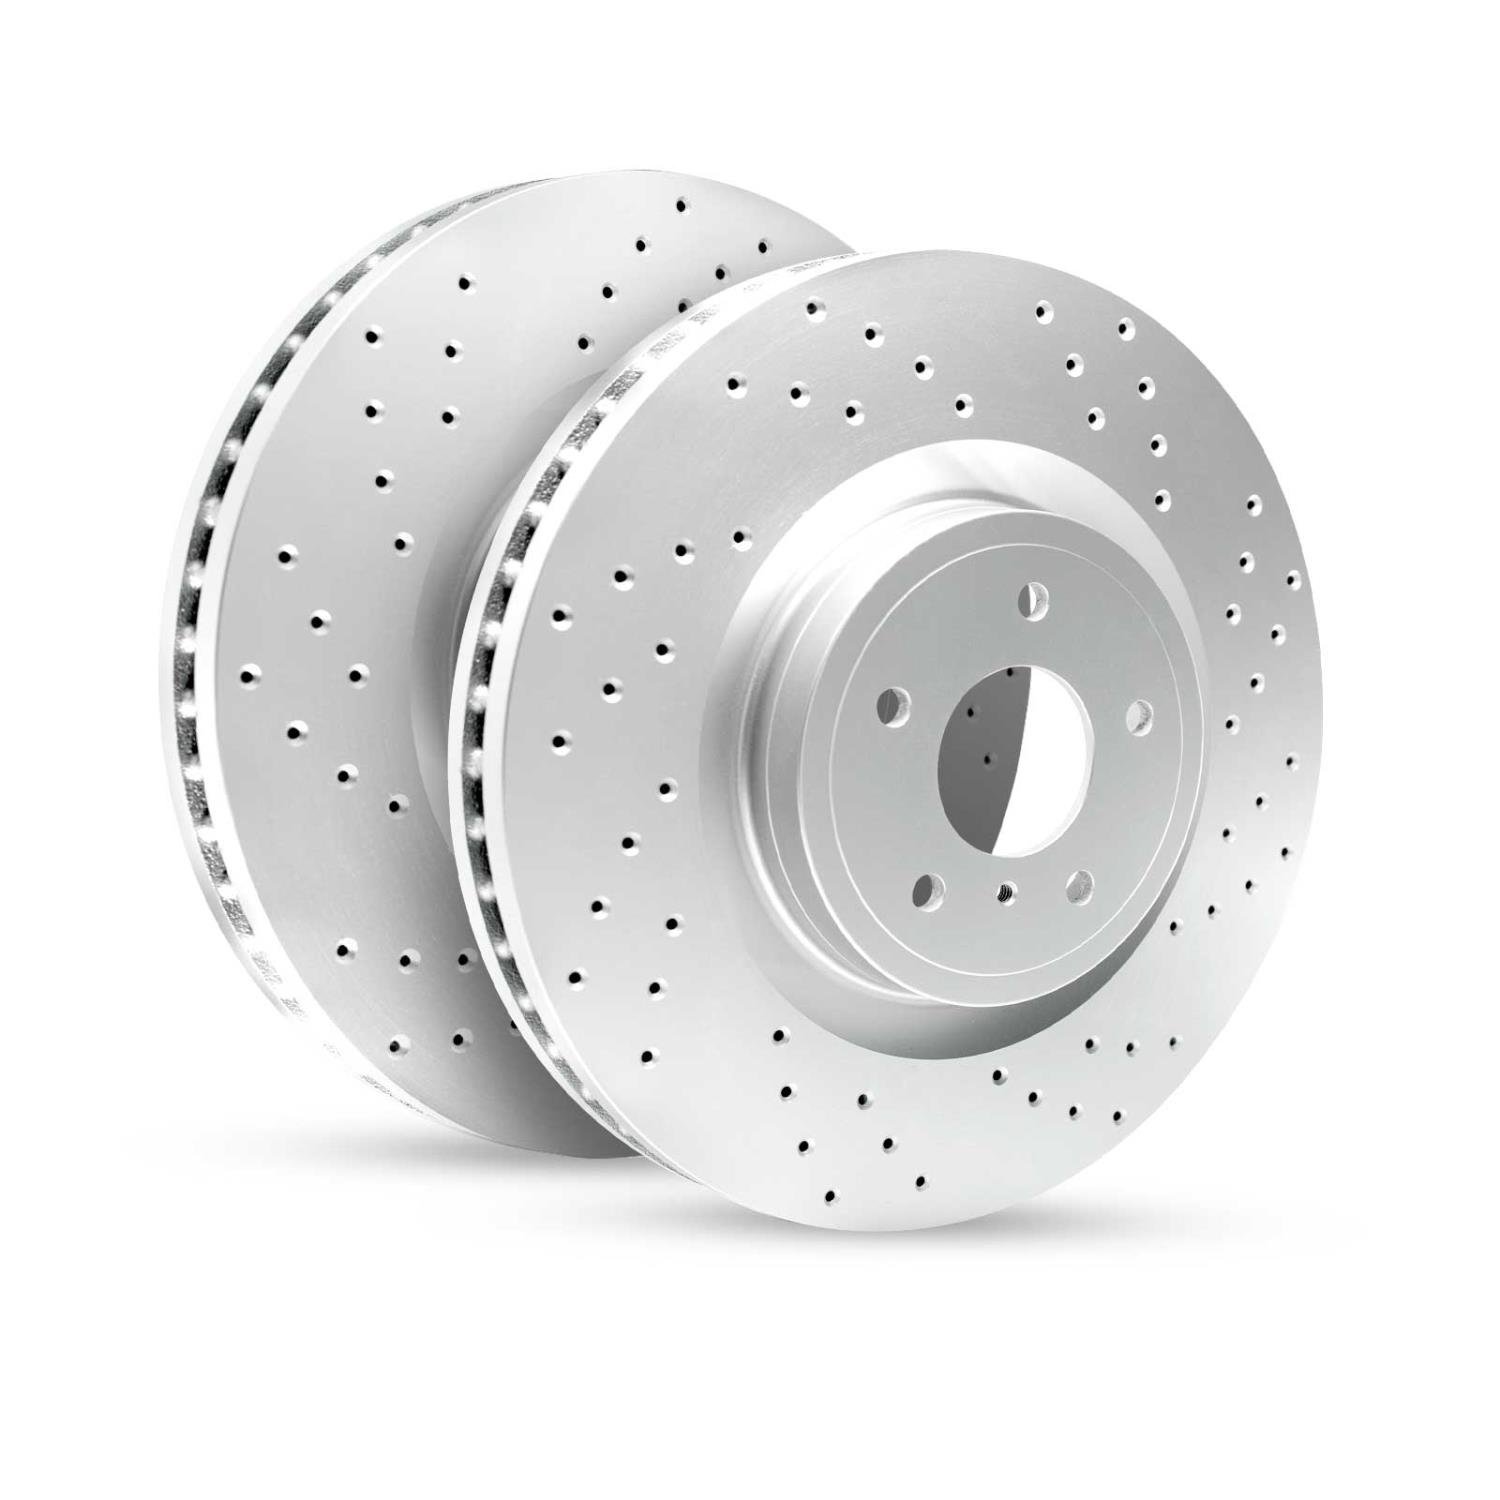 GEO-Carbon Drilled/Slotted Rotors, 1995-2004 Ford/Mazda,